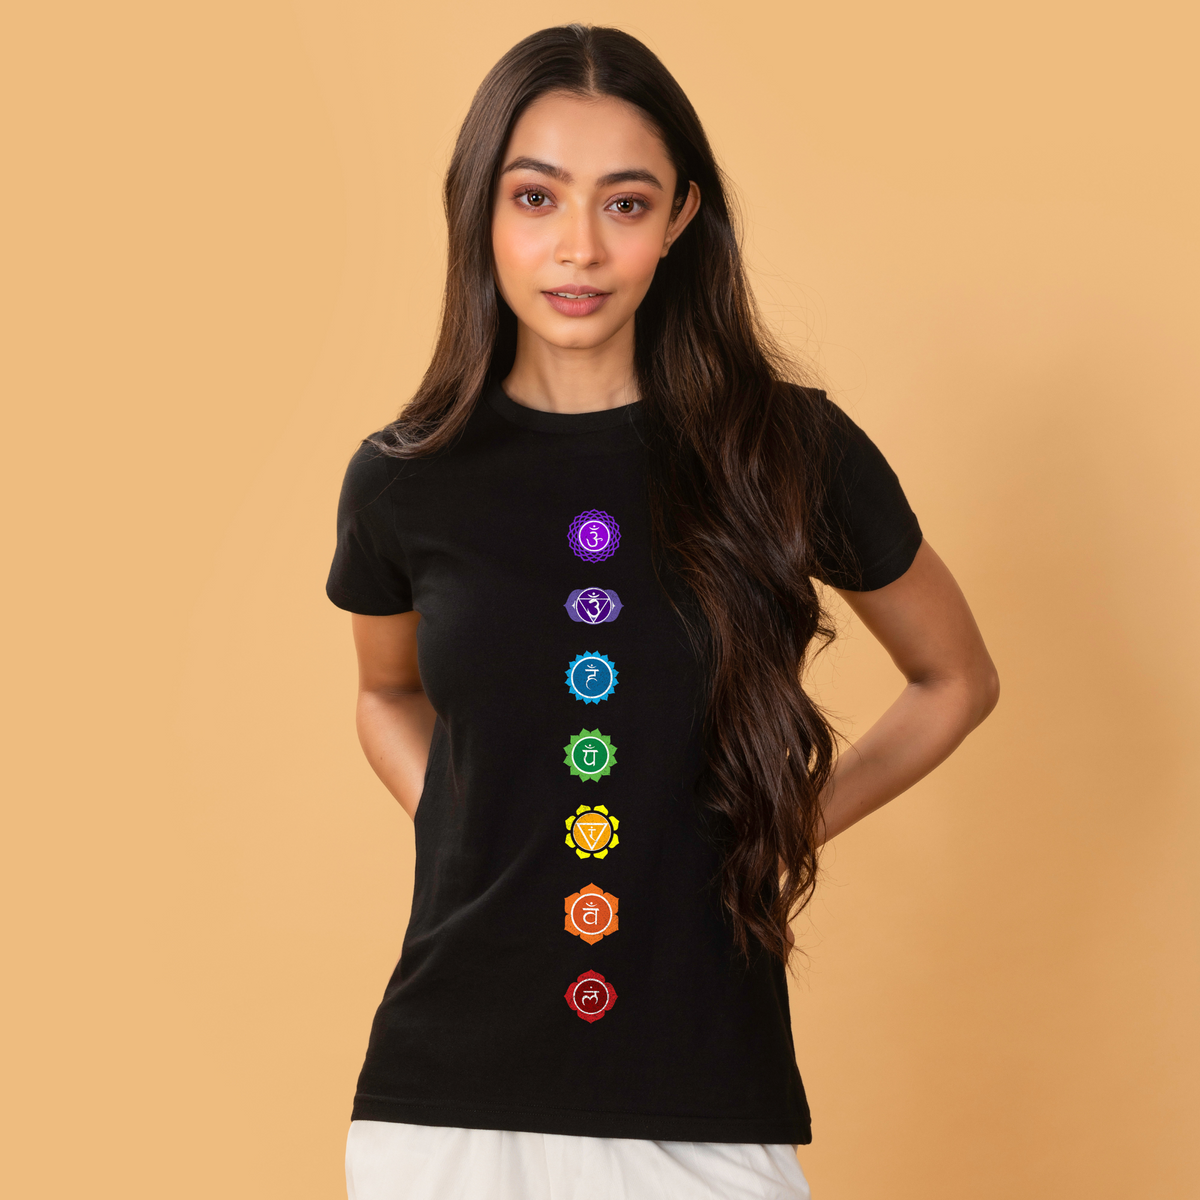 1.Buy Chakra Women's Yoga T-shirtPremium Yoga T-shirts for Women by Out of  Order